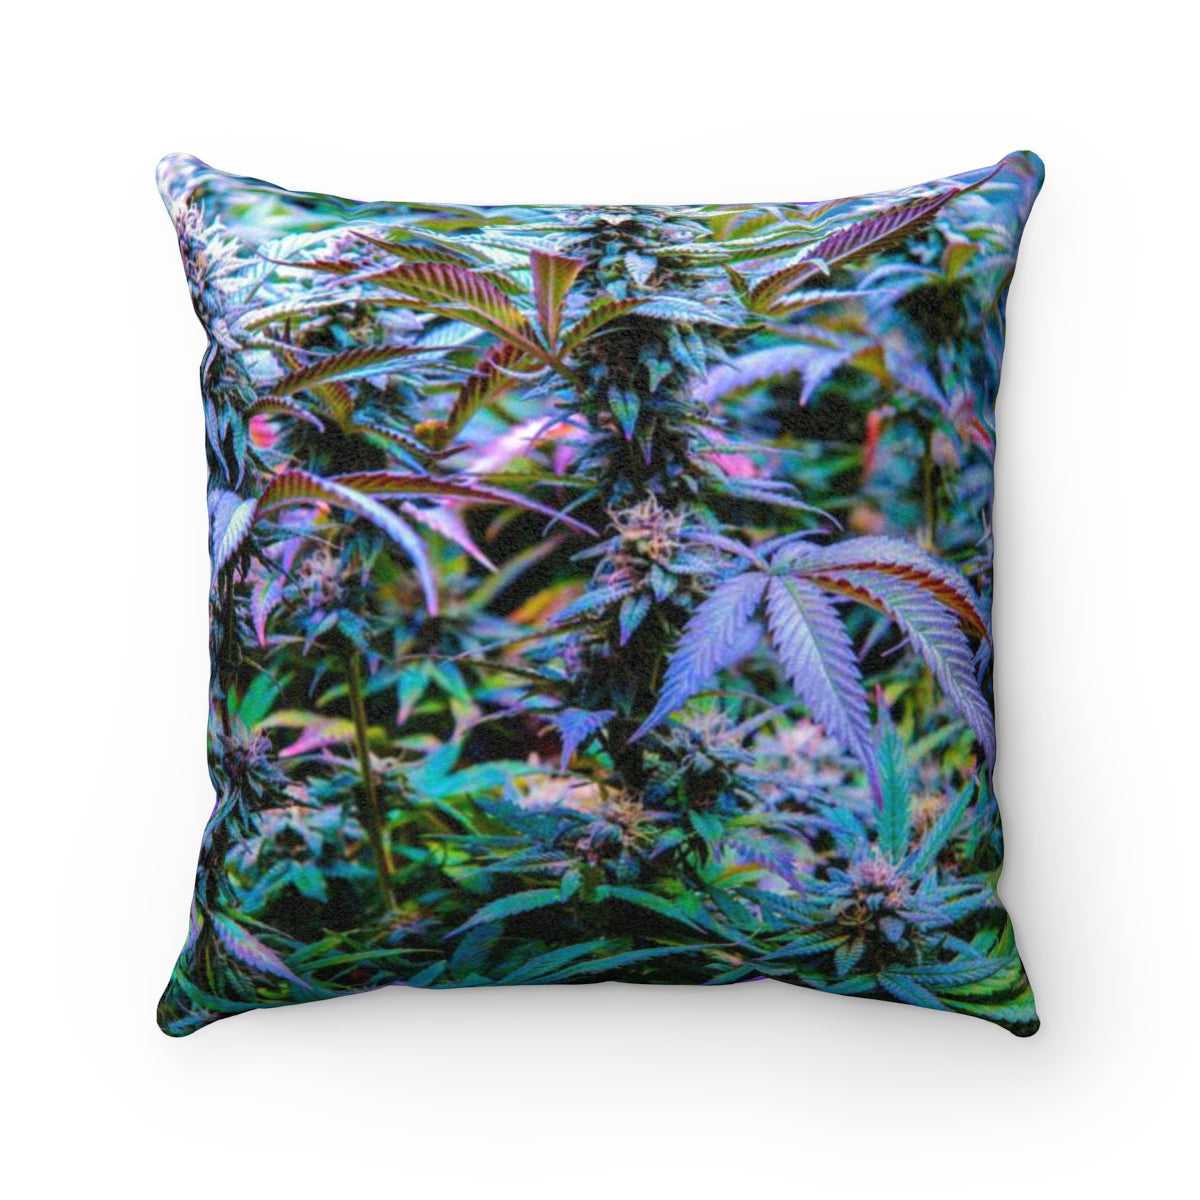 The Rainbow Cannabis Faux Suede Square Pillow